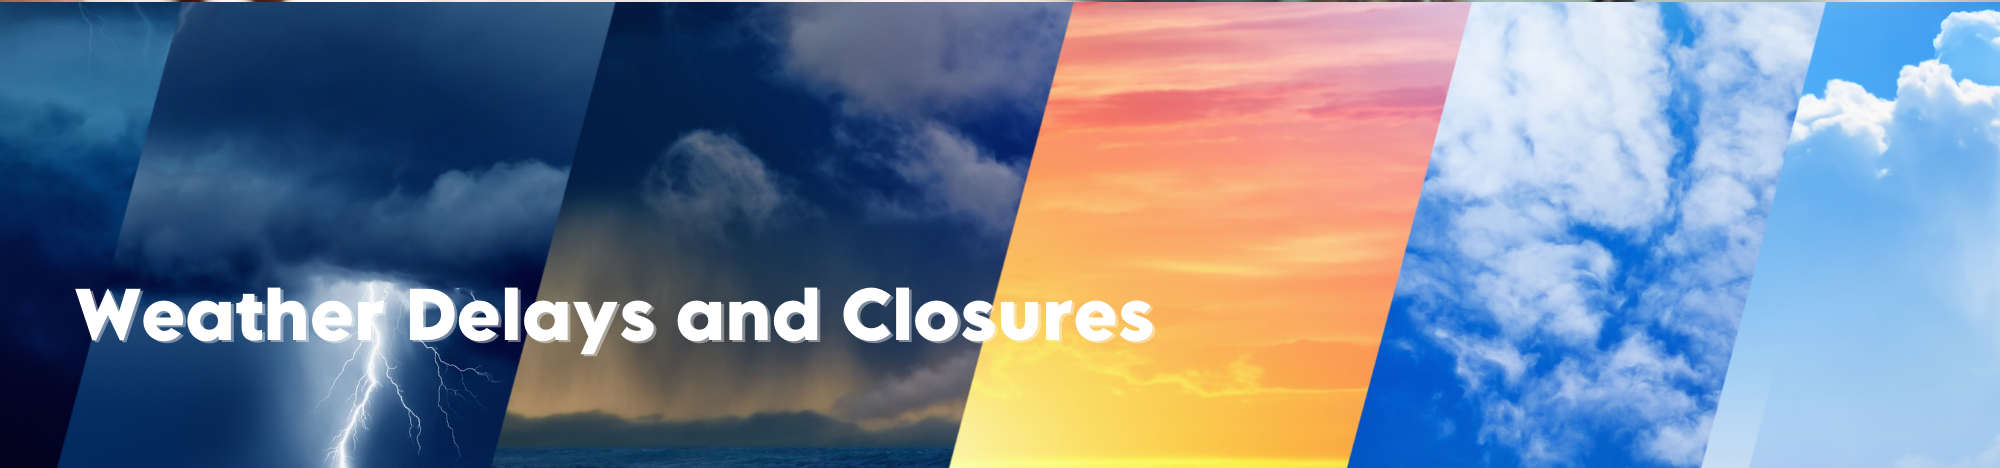 Weather delays and closures